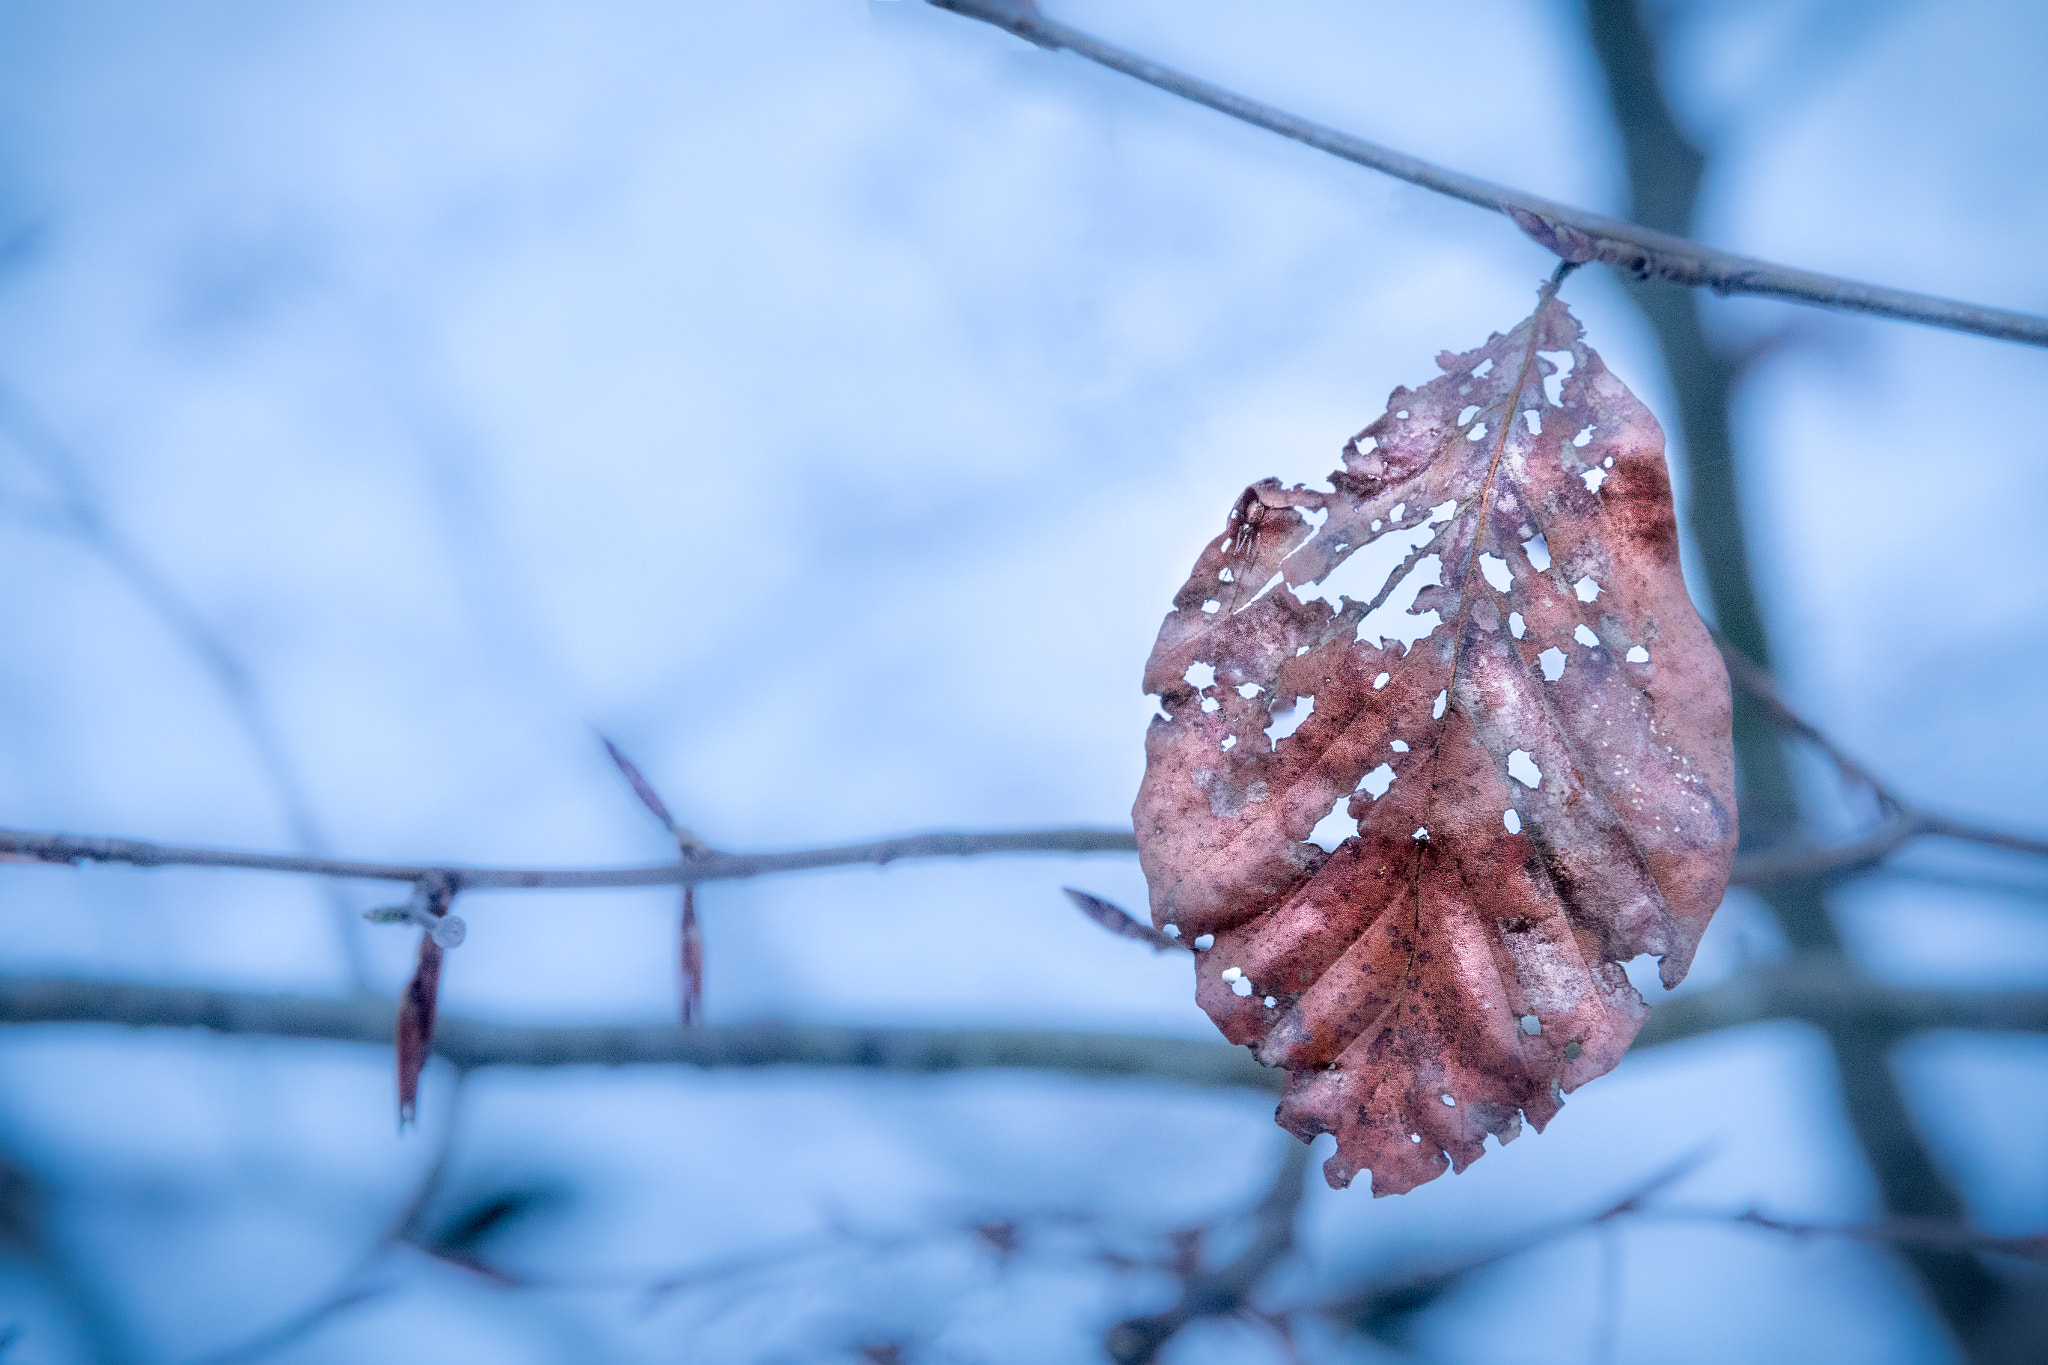 Canon EOS 70D + Sigma 24-105mm f/4 DG OS HSM | A sample photo. Winter is coming photography